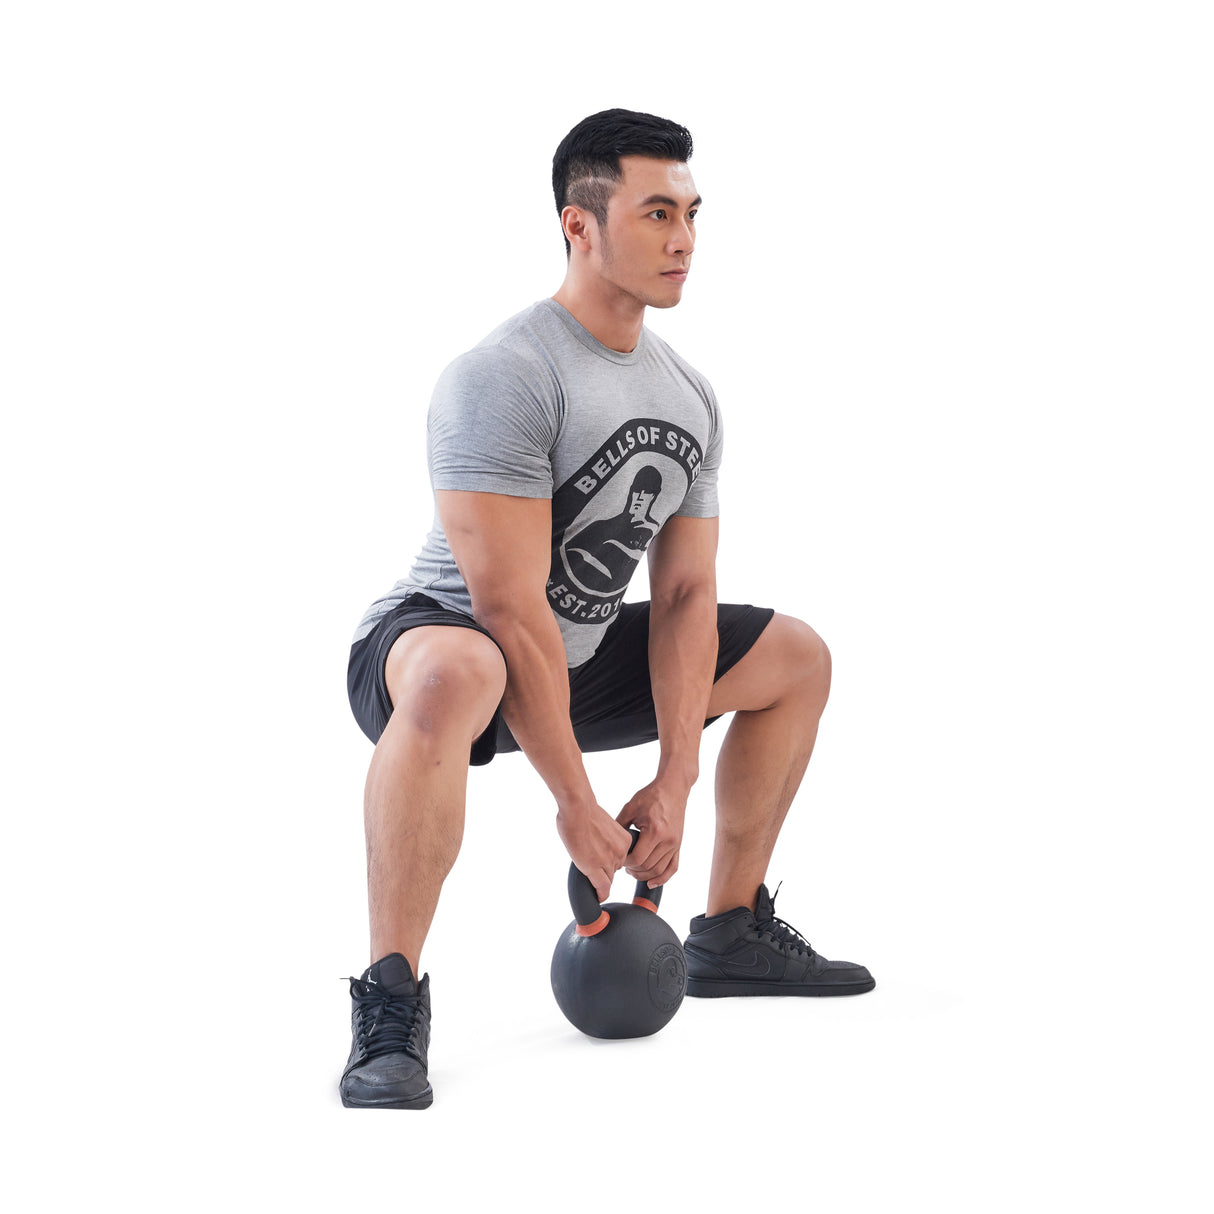 Male athlete doing deadlift with Powder Coated Kettlebells